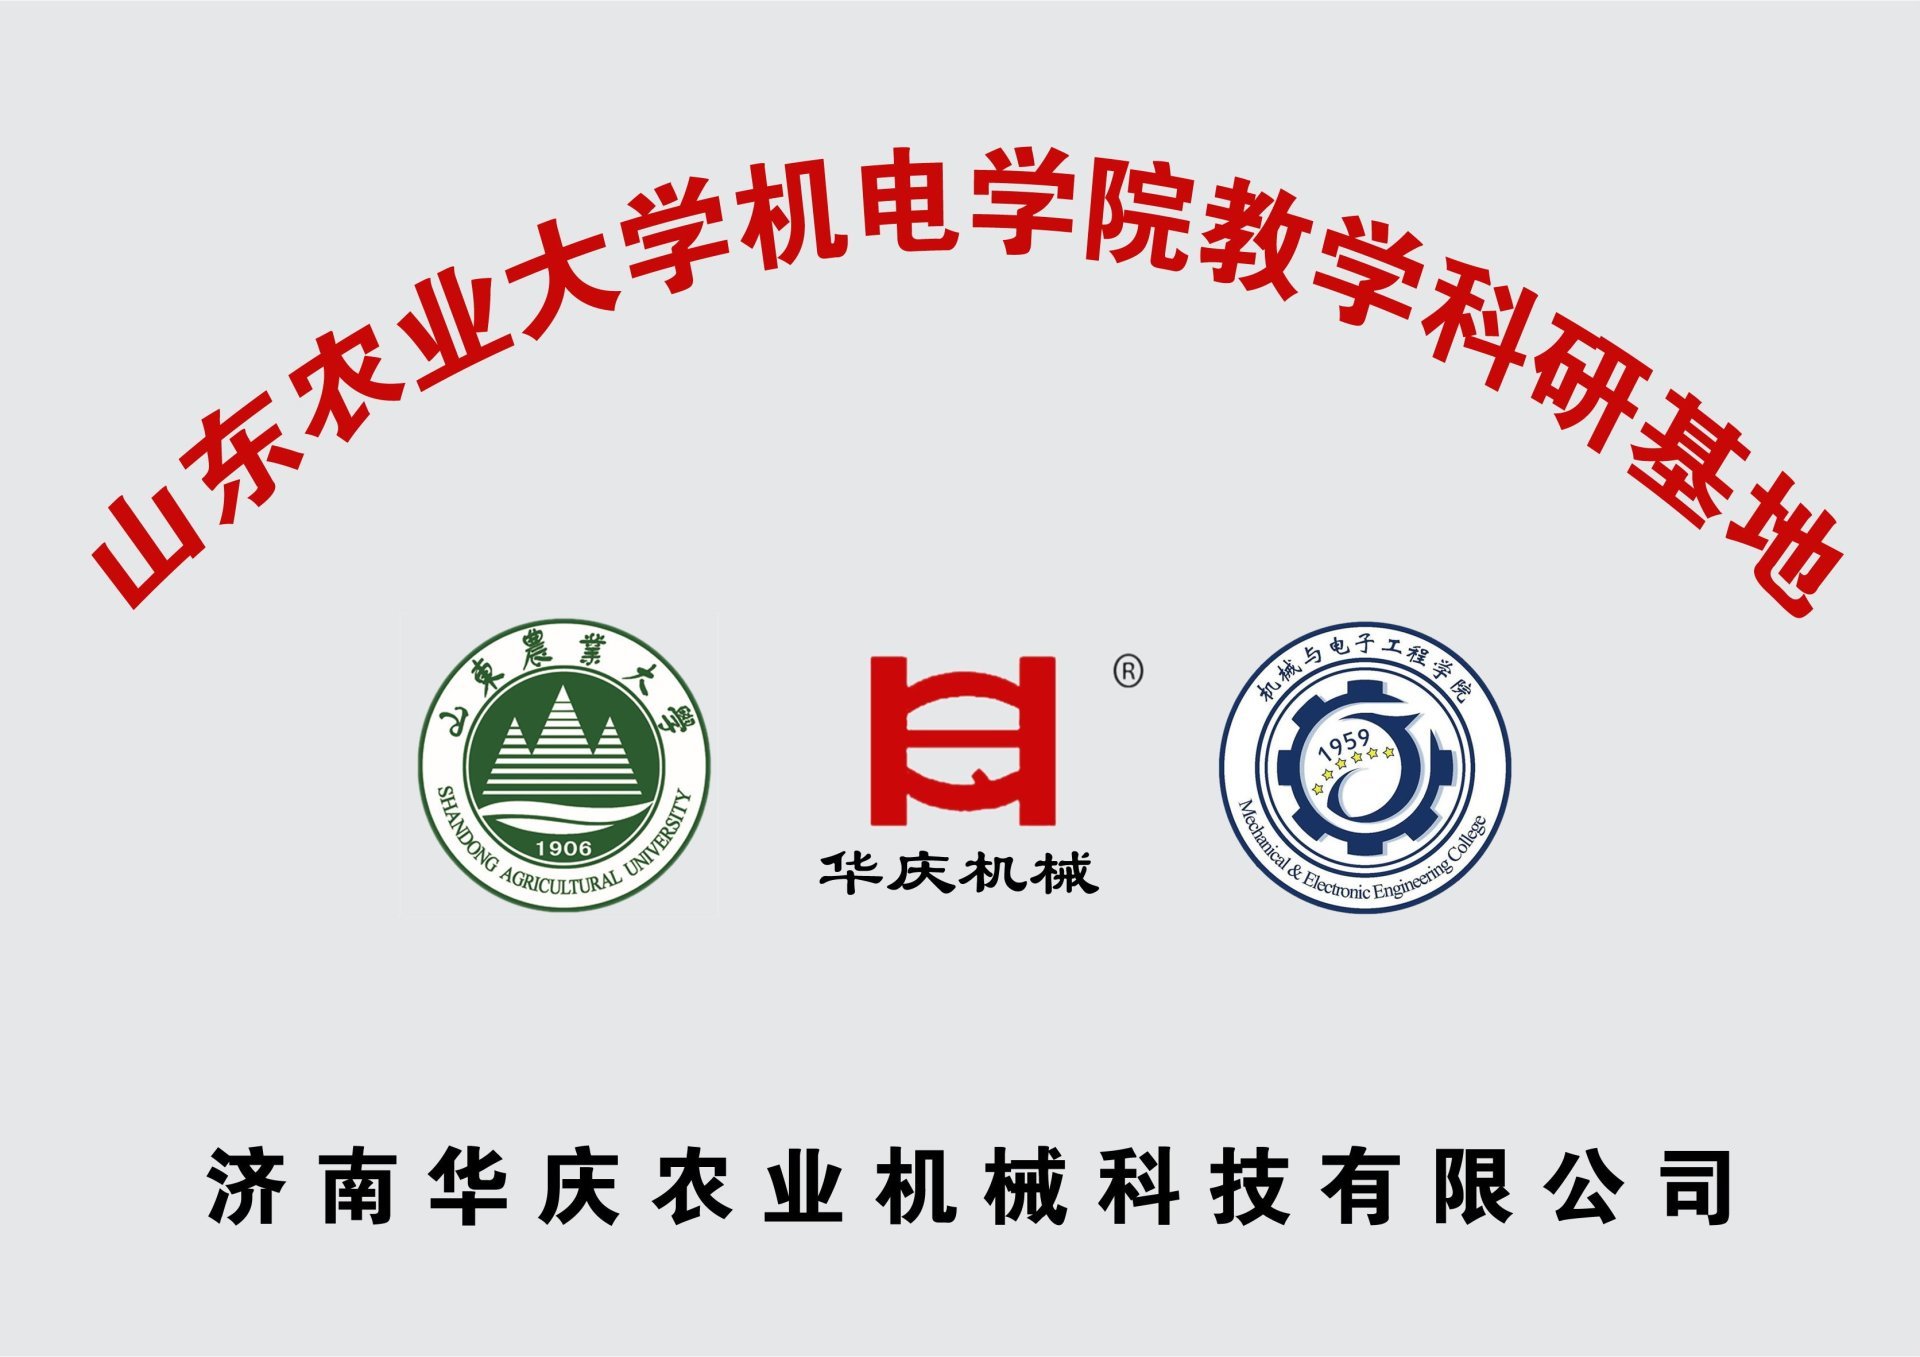 Teaching and Research Base of Shandong Agricultural University